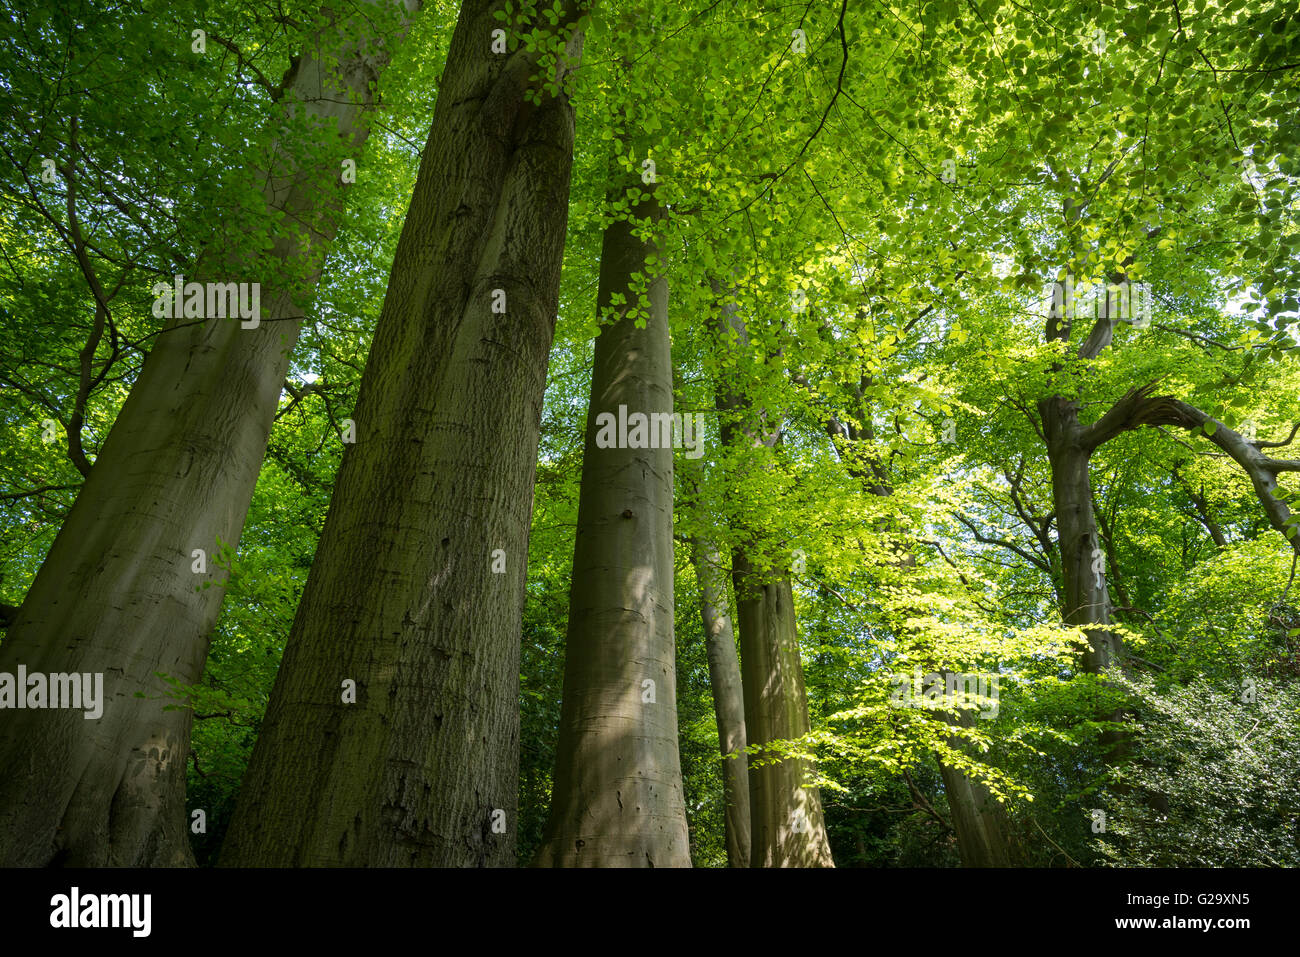 Mature Beech trees with fresh new greenery at Alderley edge in Cheshire. Stock Photo